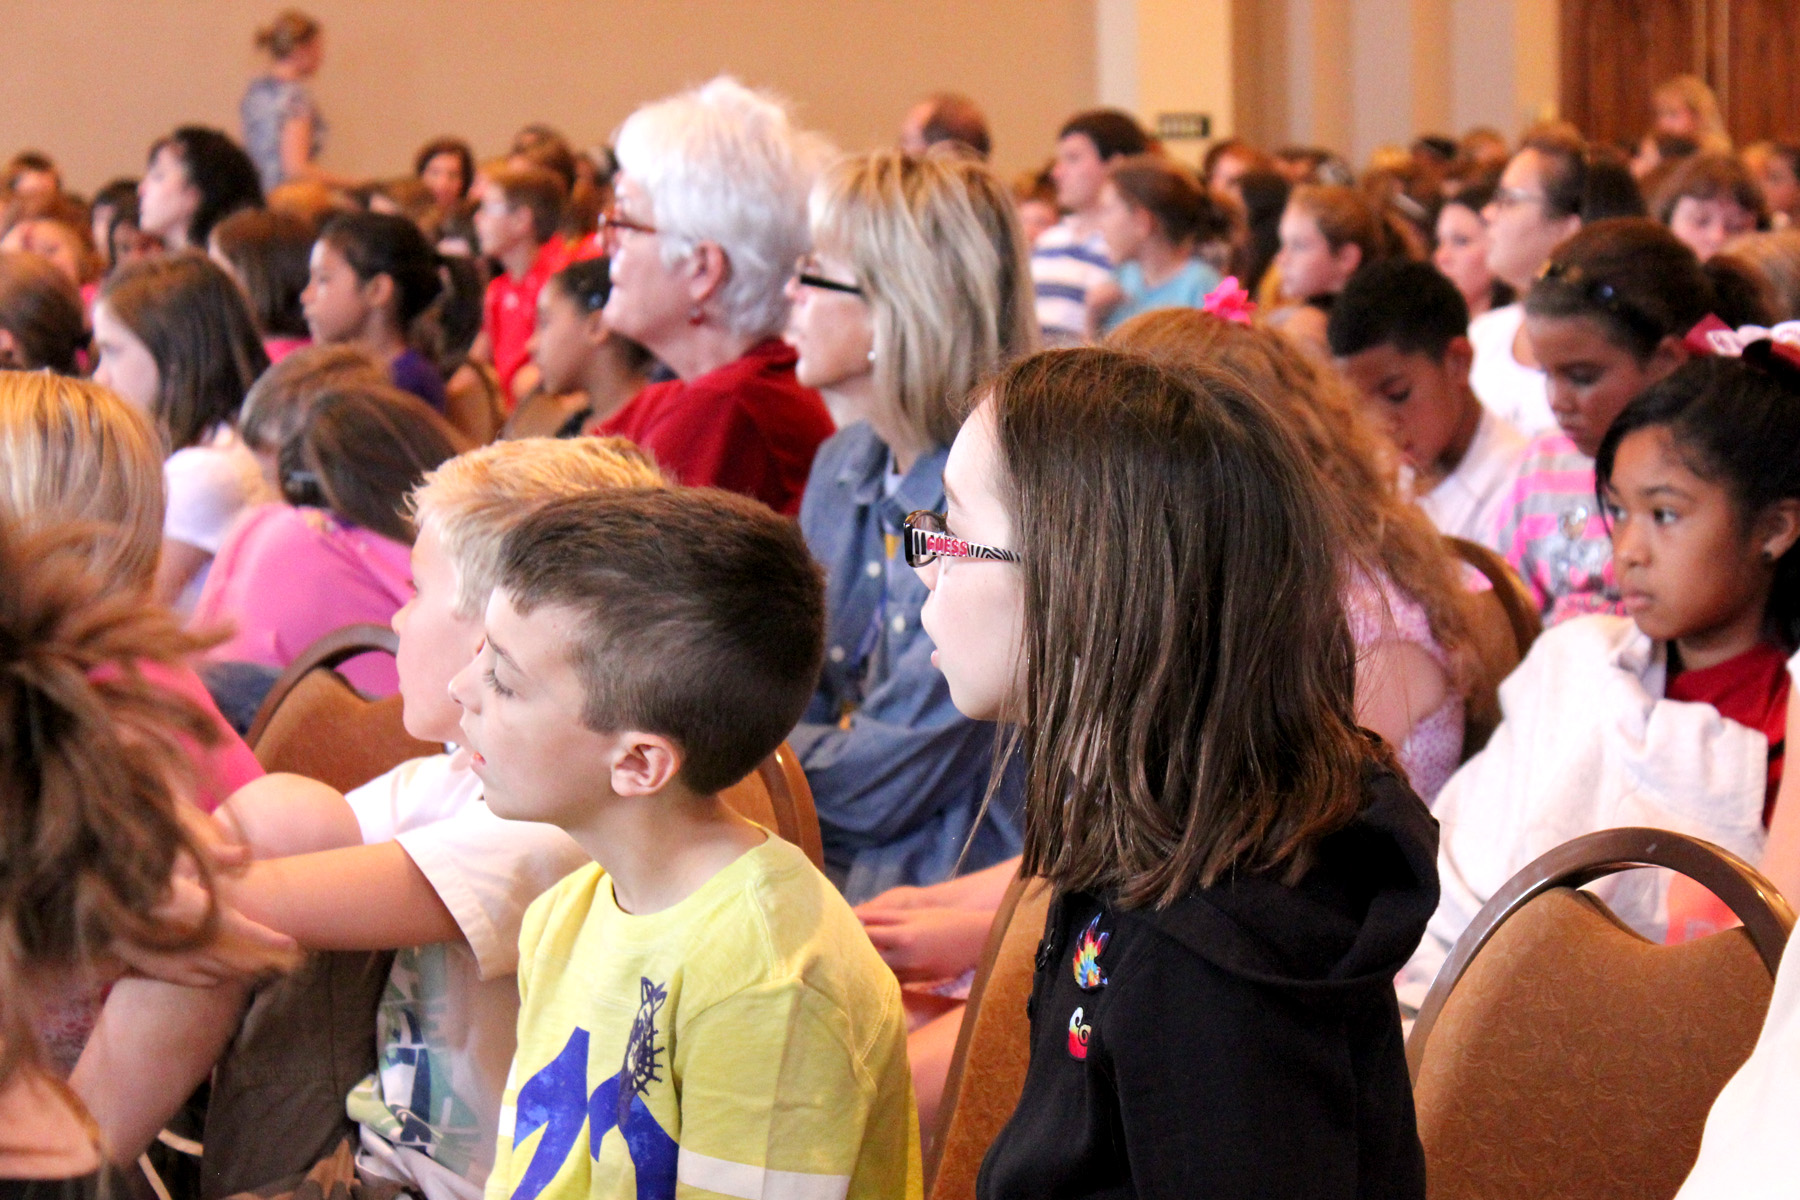 Norman Public School 4th and 5th graders look on at the beginning of the CultureQuest readings. Photo by Jen Rickard.